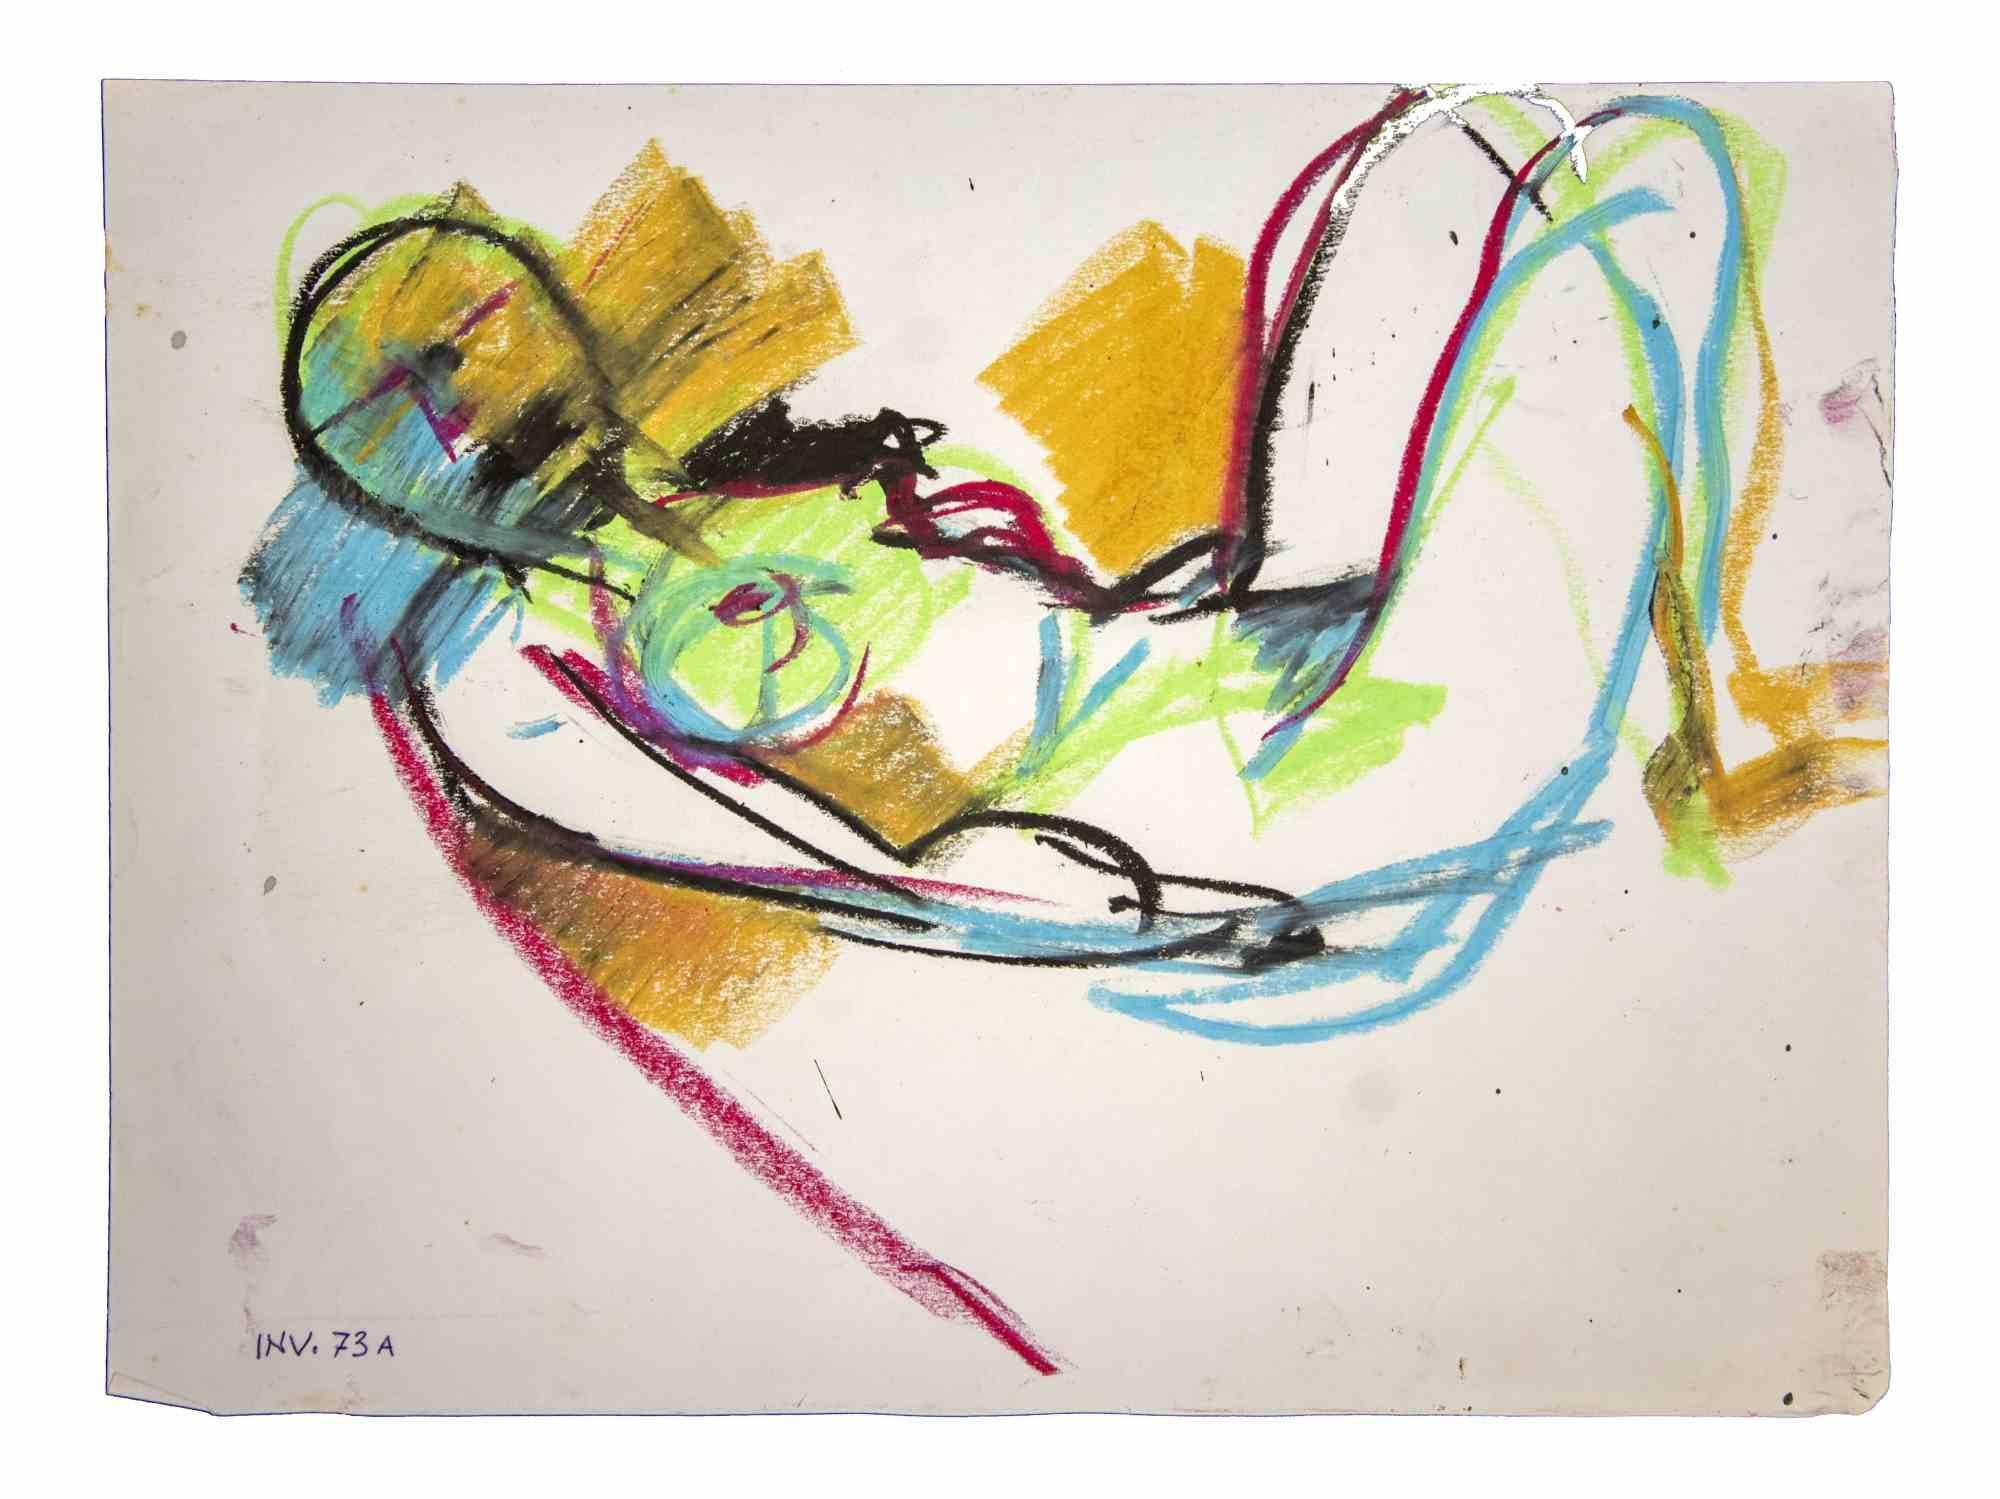 Reclined Nude is an original artwork realized in the 1970s by the Italian Contemporary artist Leo Guida  (1992 - 2017).

Original oil pastel and watercolor drawing on paper.

Good conditions.

Leo Guida  (1992 - 2017). Sensitive to current issues,